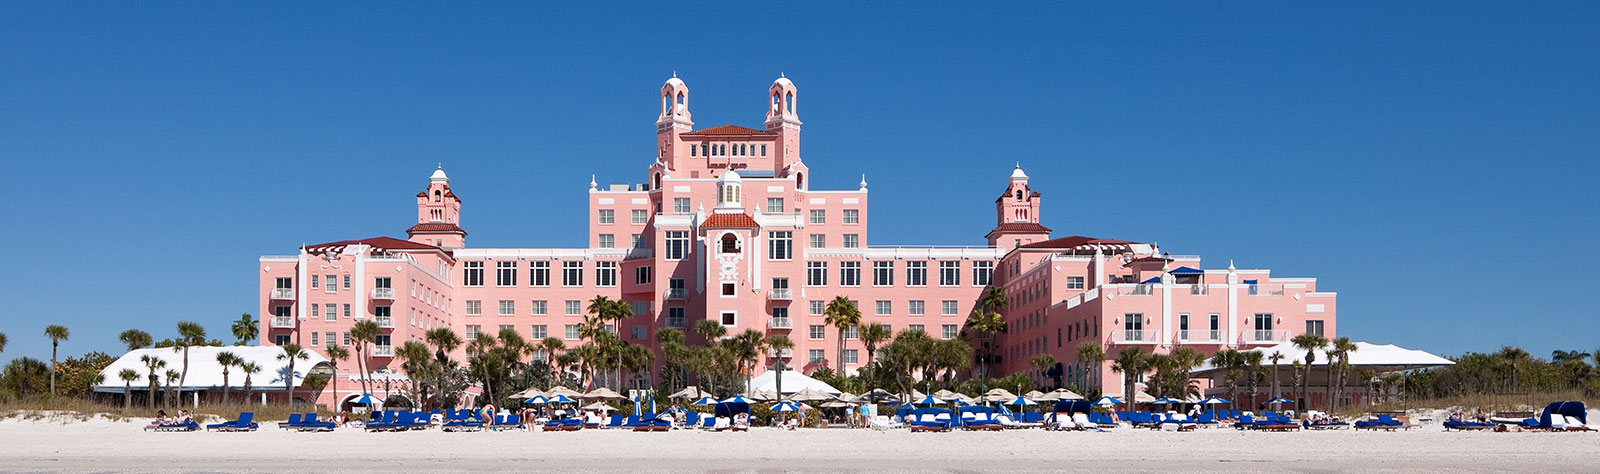 Inside the Recently Renovated Boca Raton, an Iconic South Florida Beach  Resort